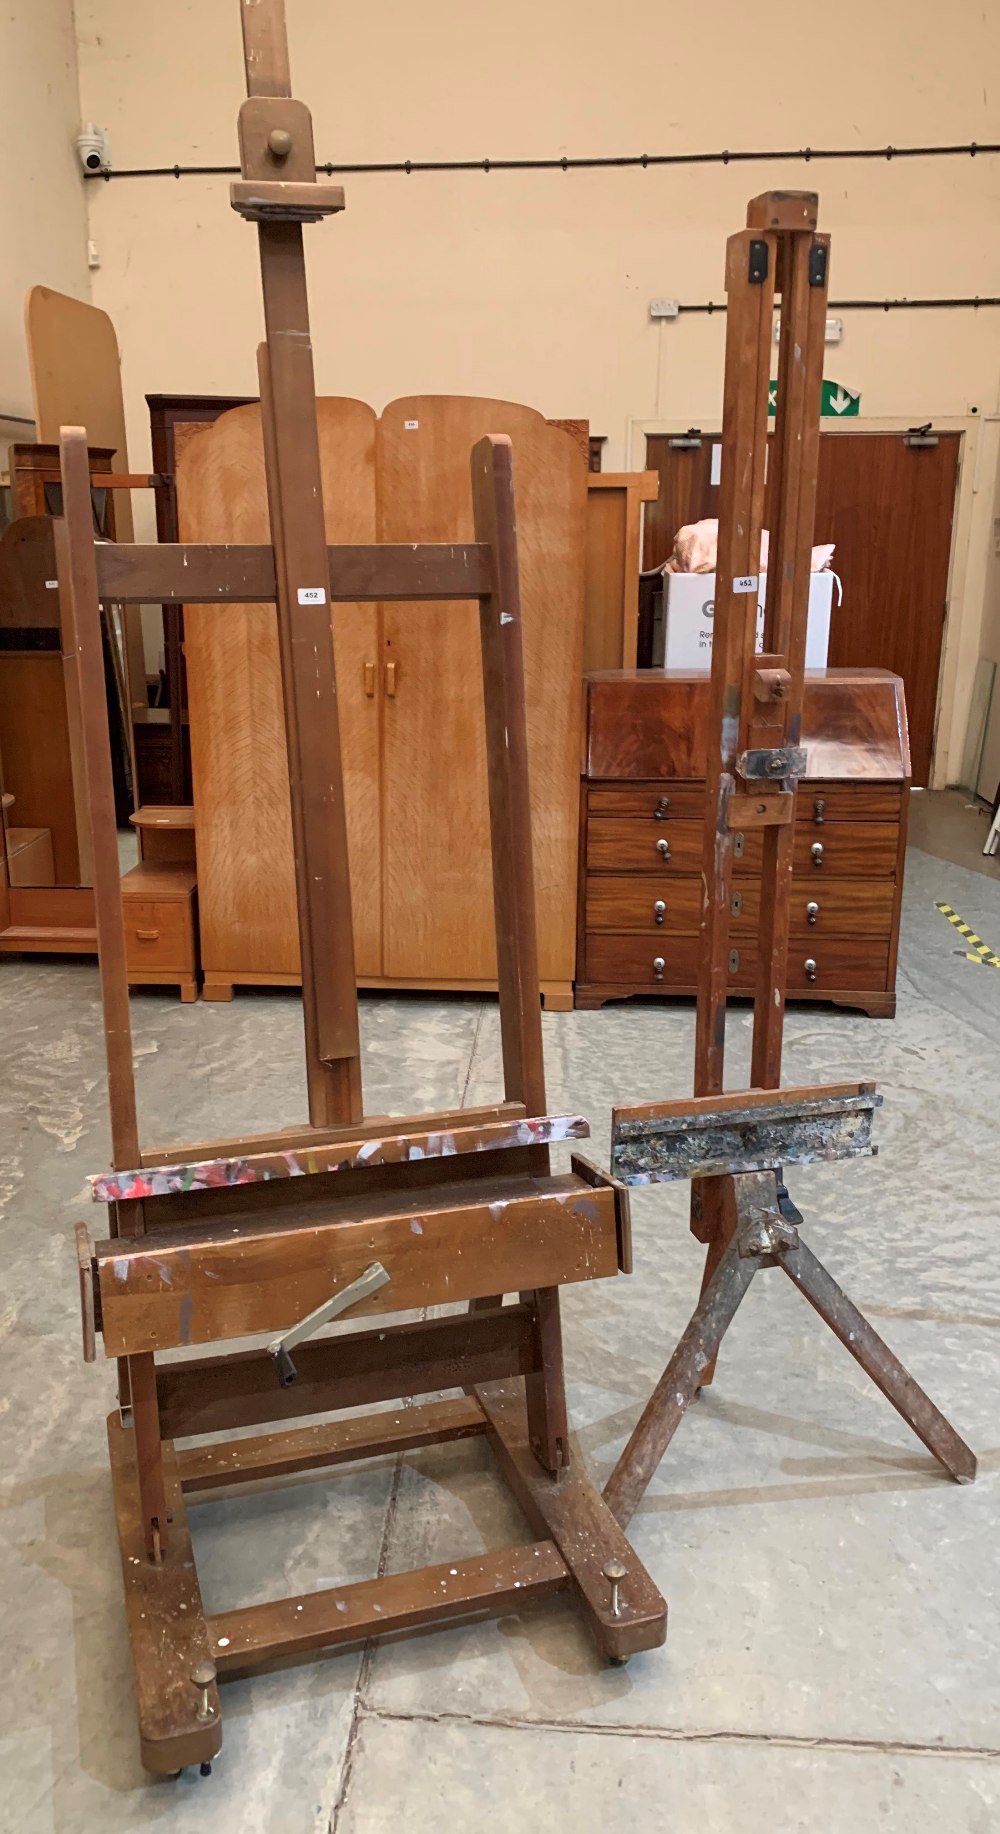 Two artist's studio easels